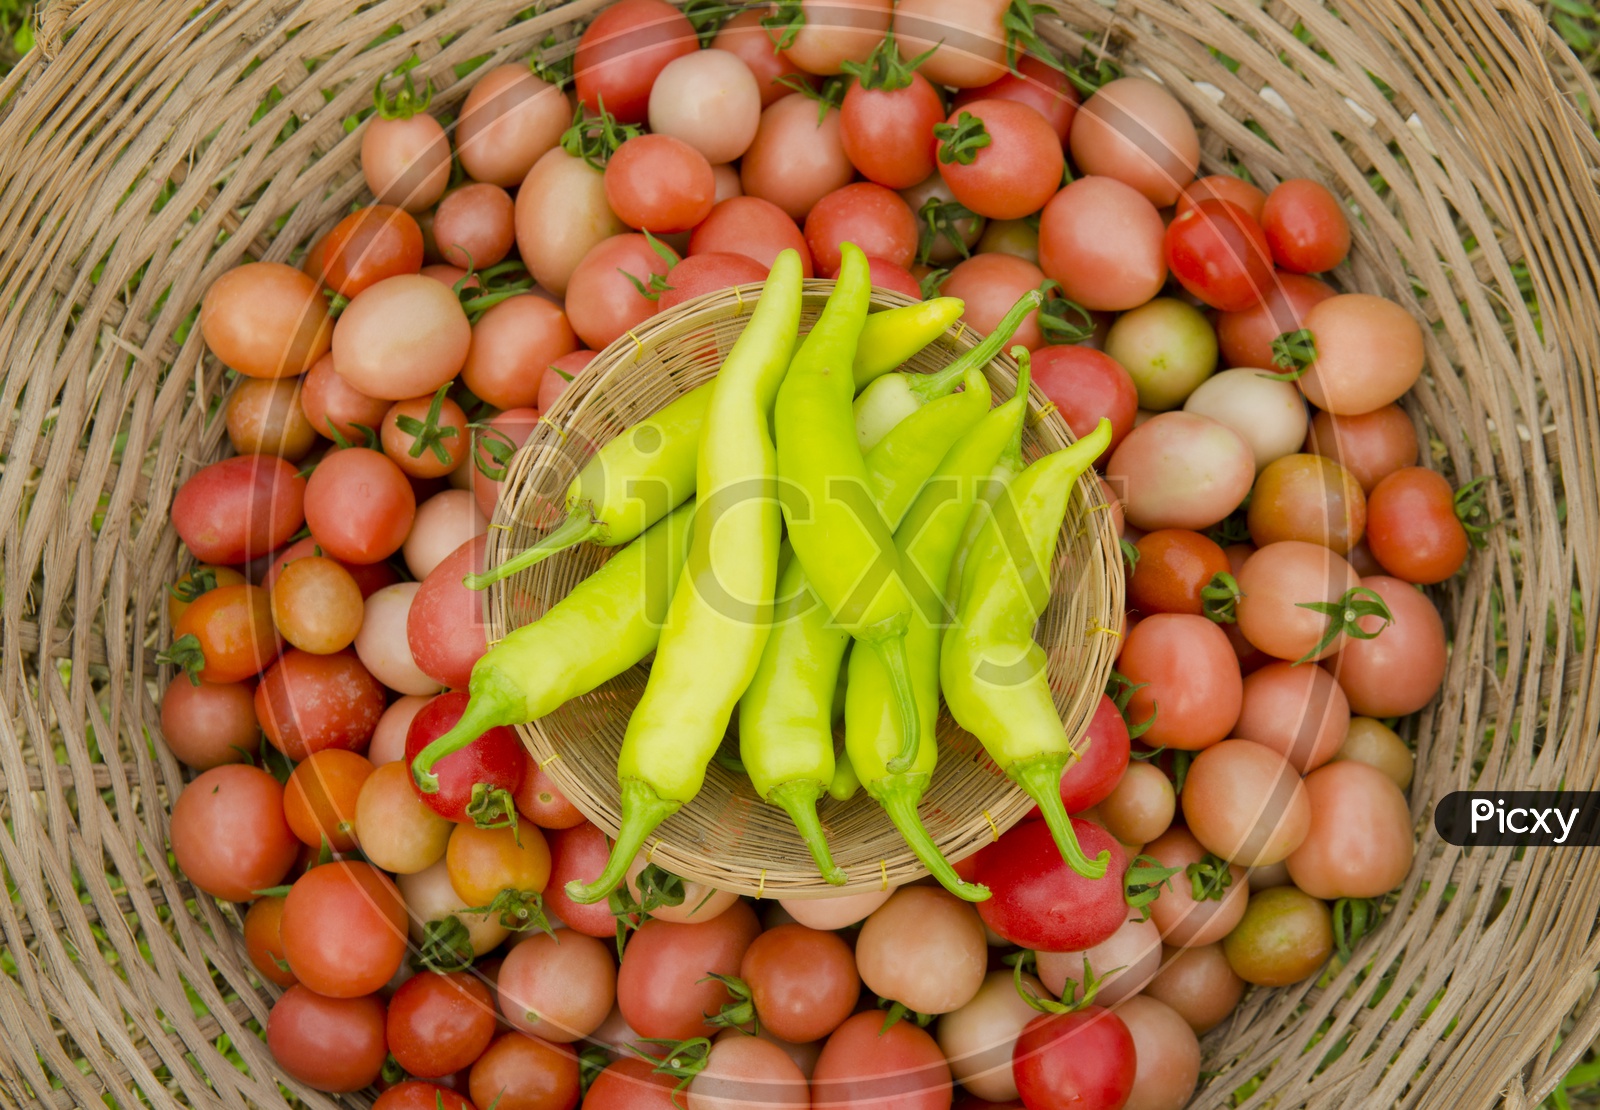 Green Chilies and Tomatoes in a Basket